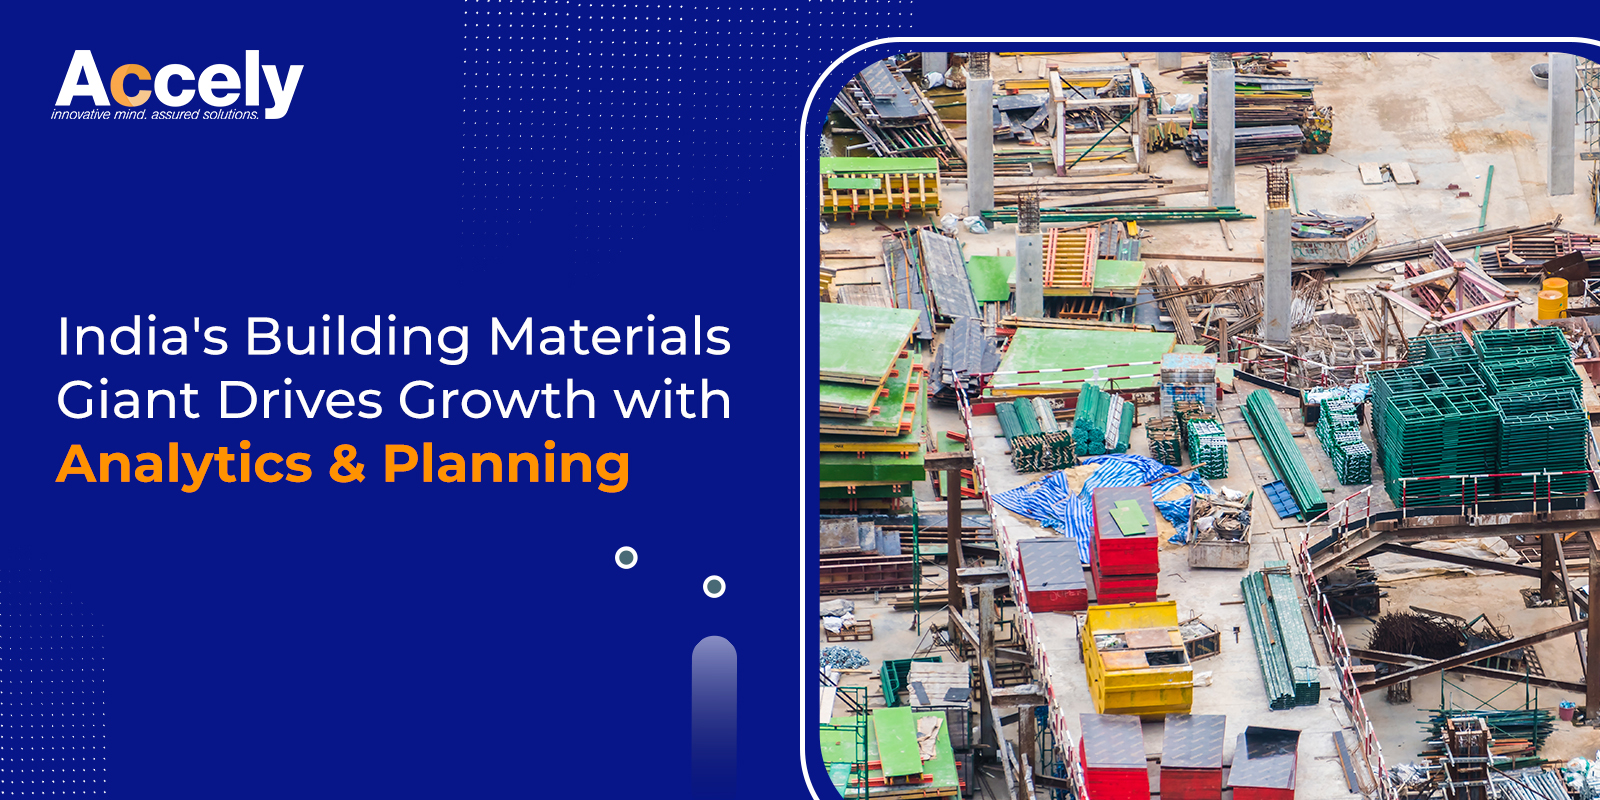 India's Building Materials Giant Drives Growth with Analytics & Planning